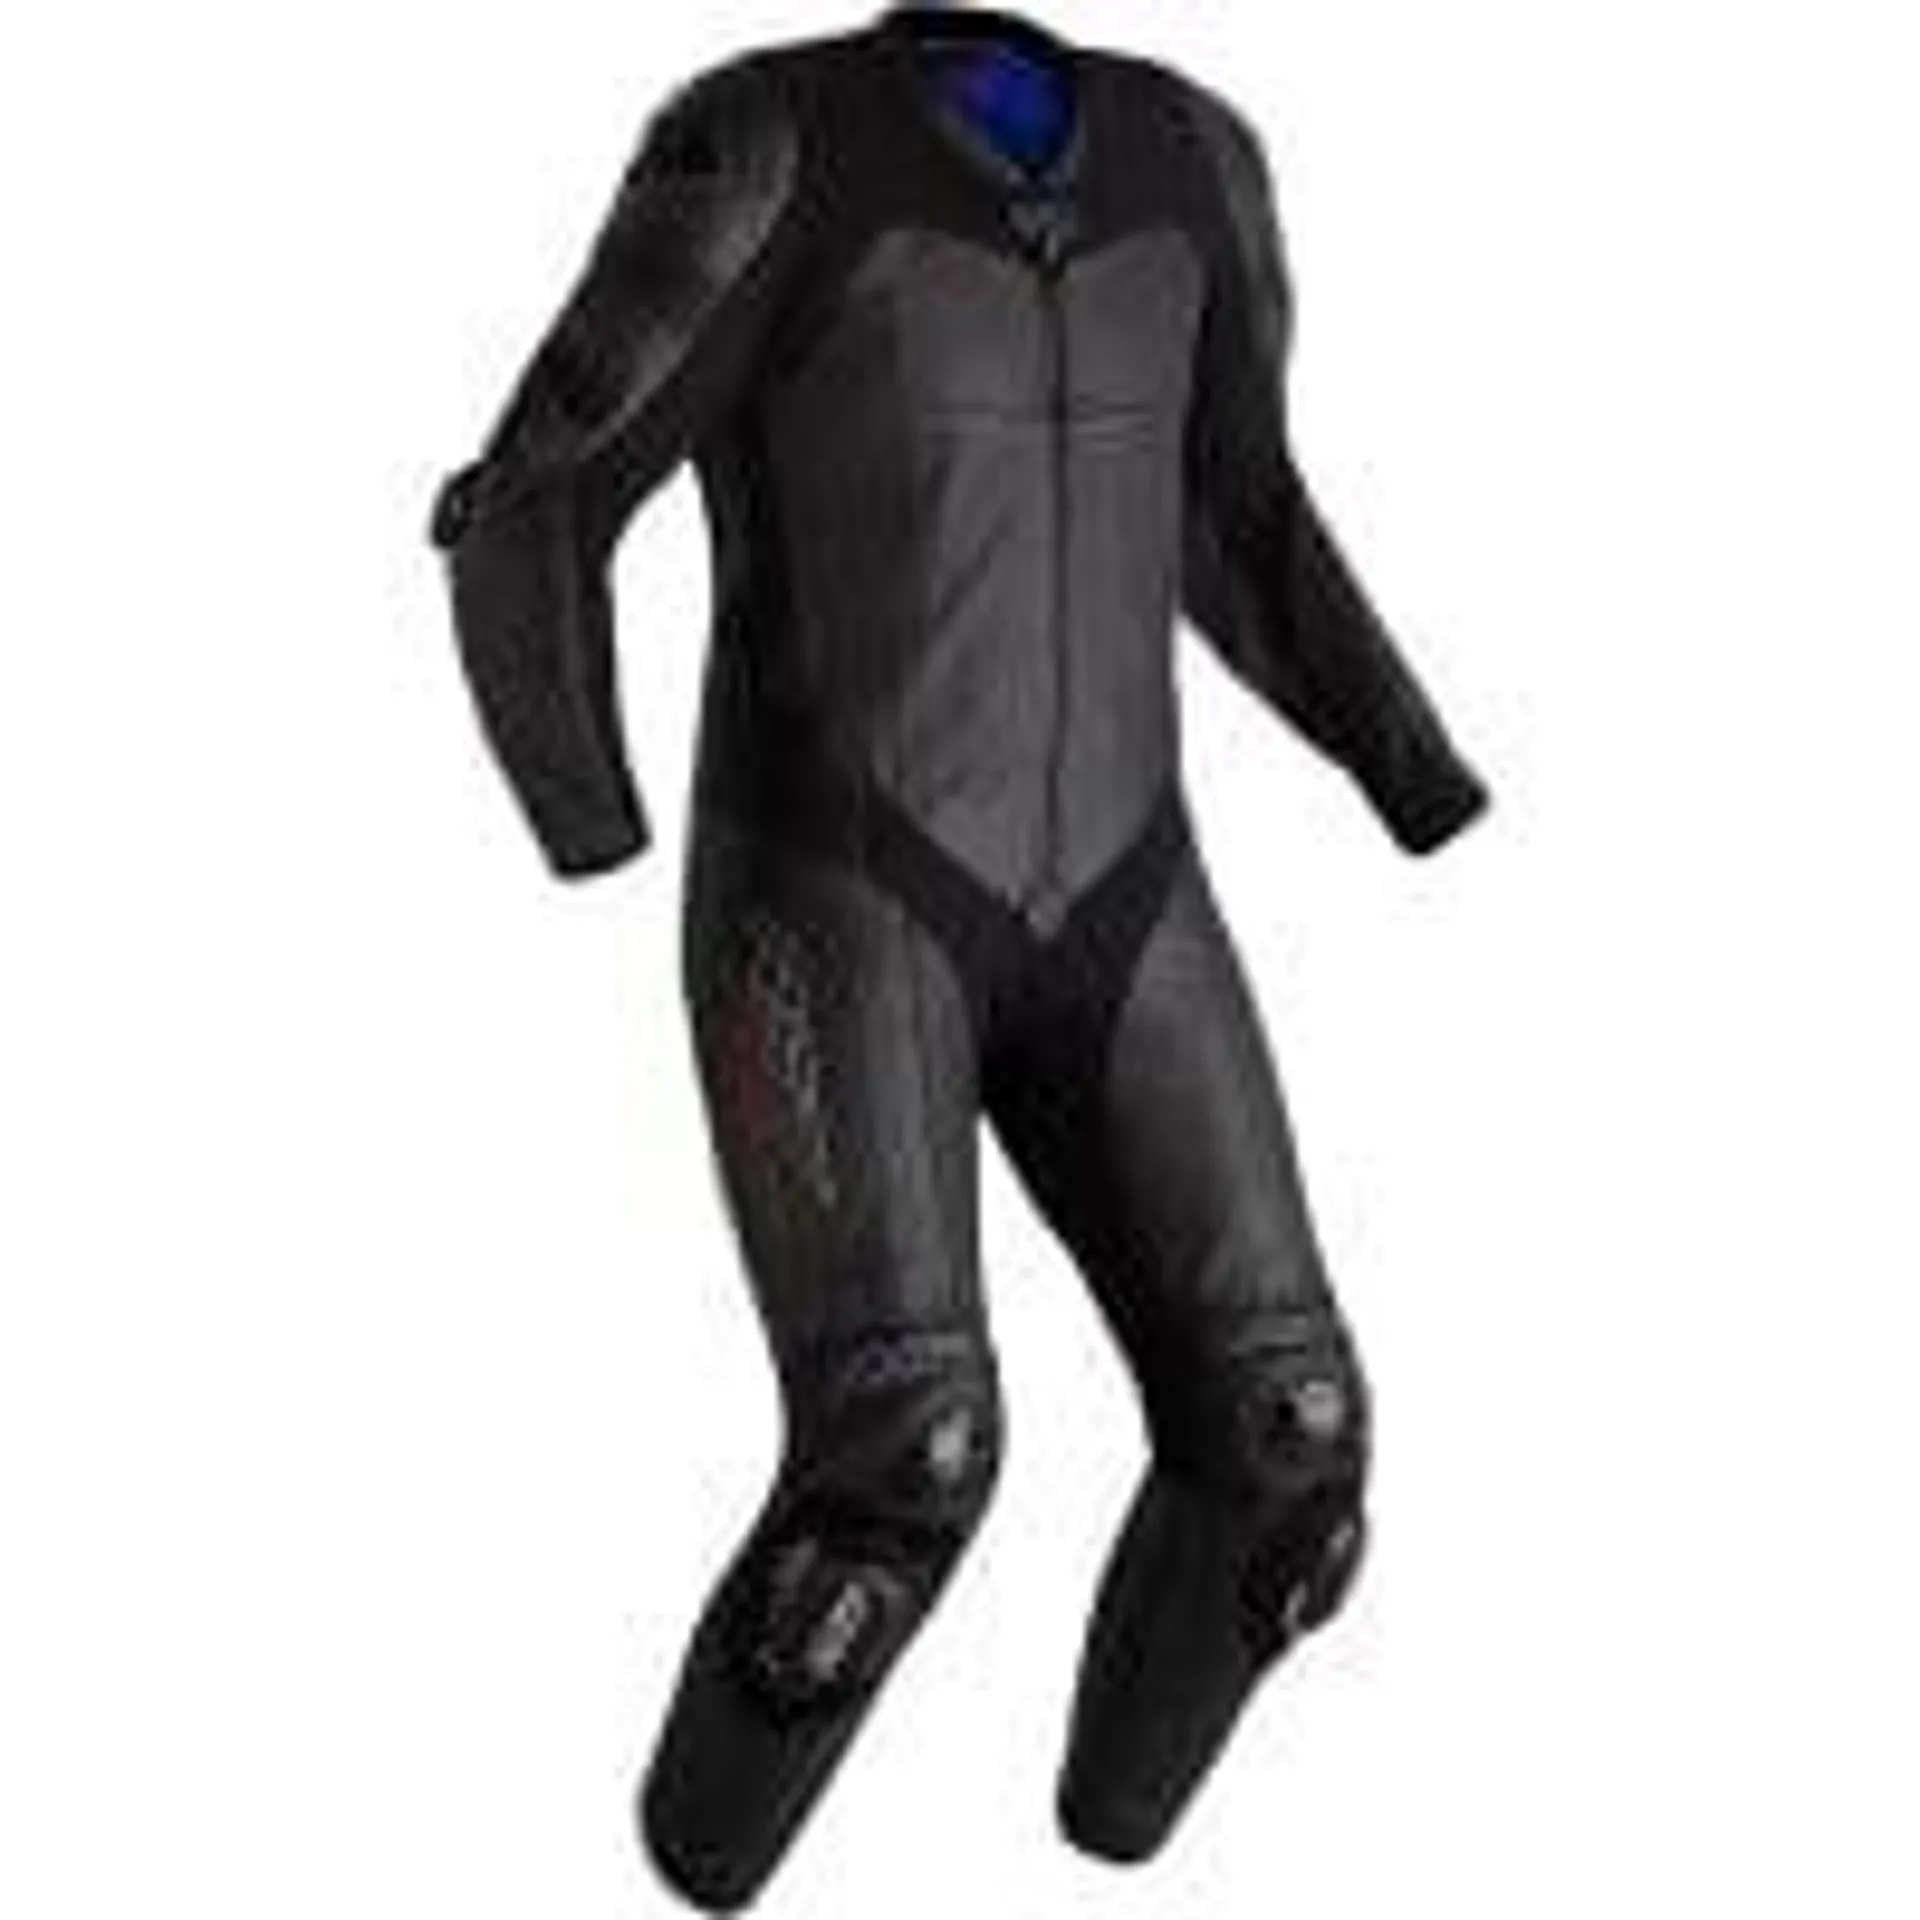 RST Pro Series Airbag CE One Piece Leather Suit - Black